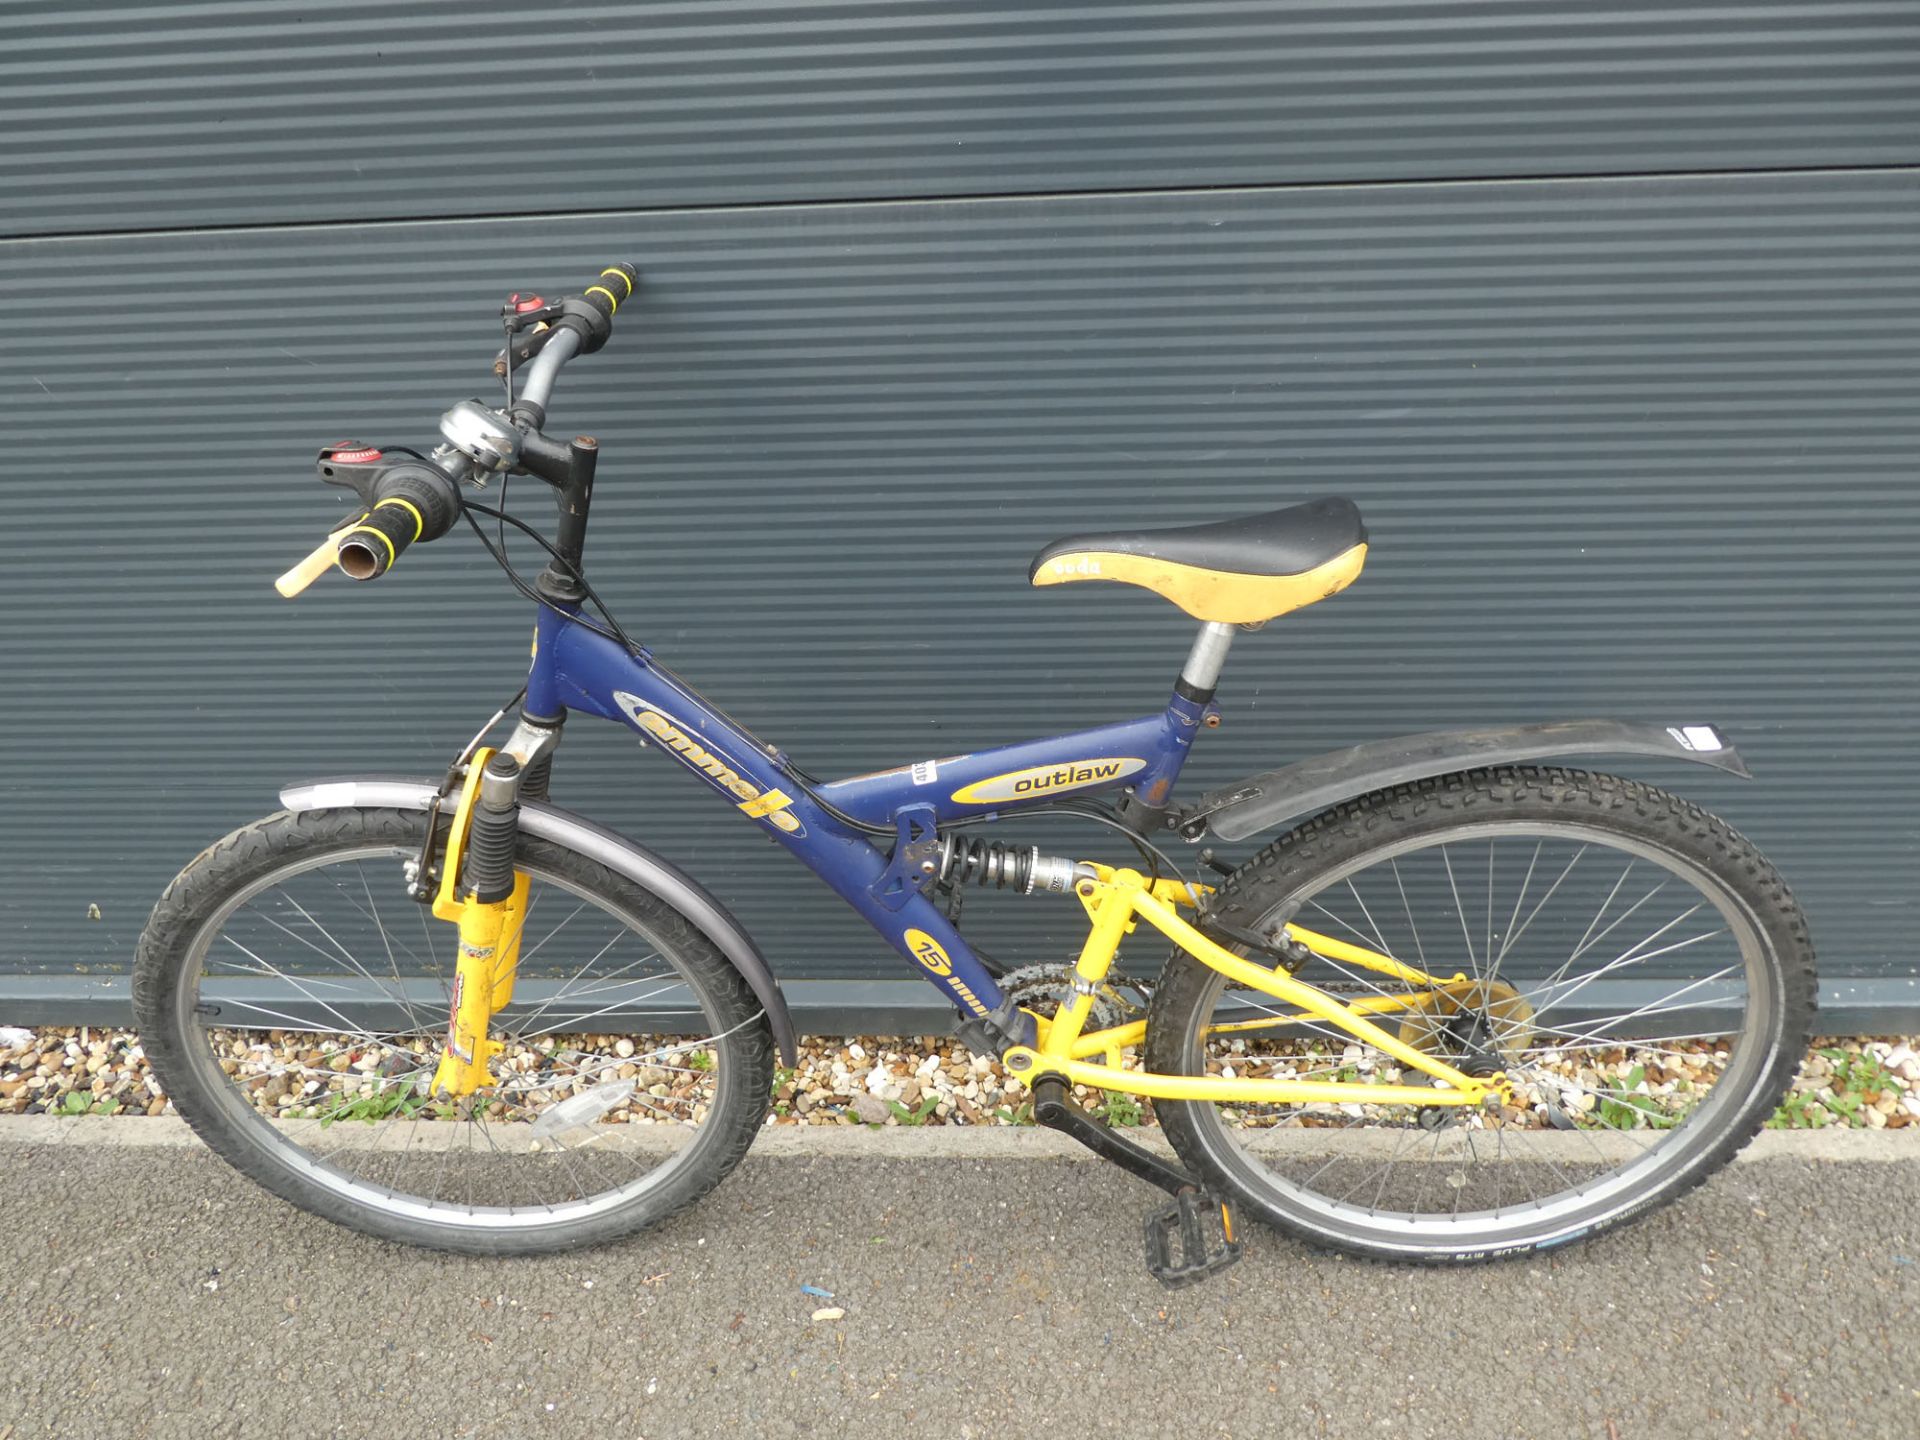 Emmelle outlaw blue and yellow suspension mountain bike